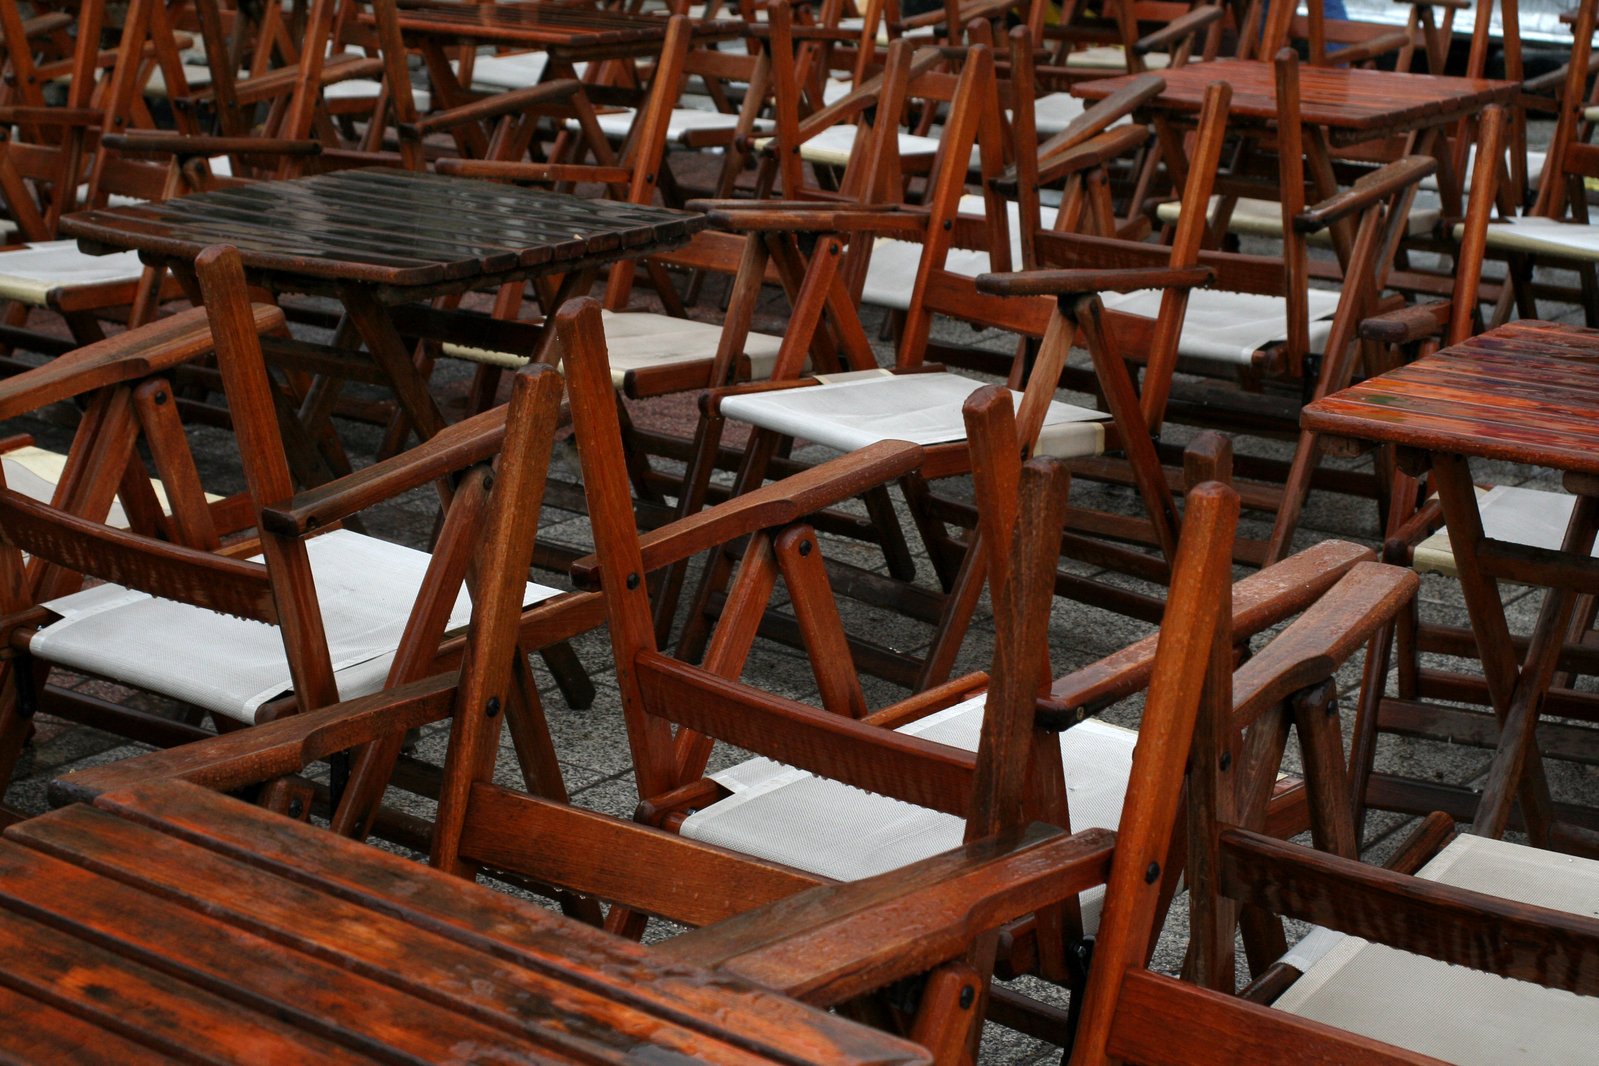 many wooden chairs and tables lined up in a room